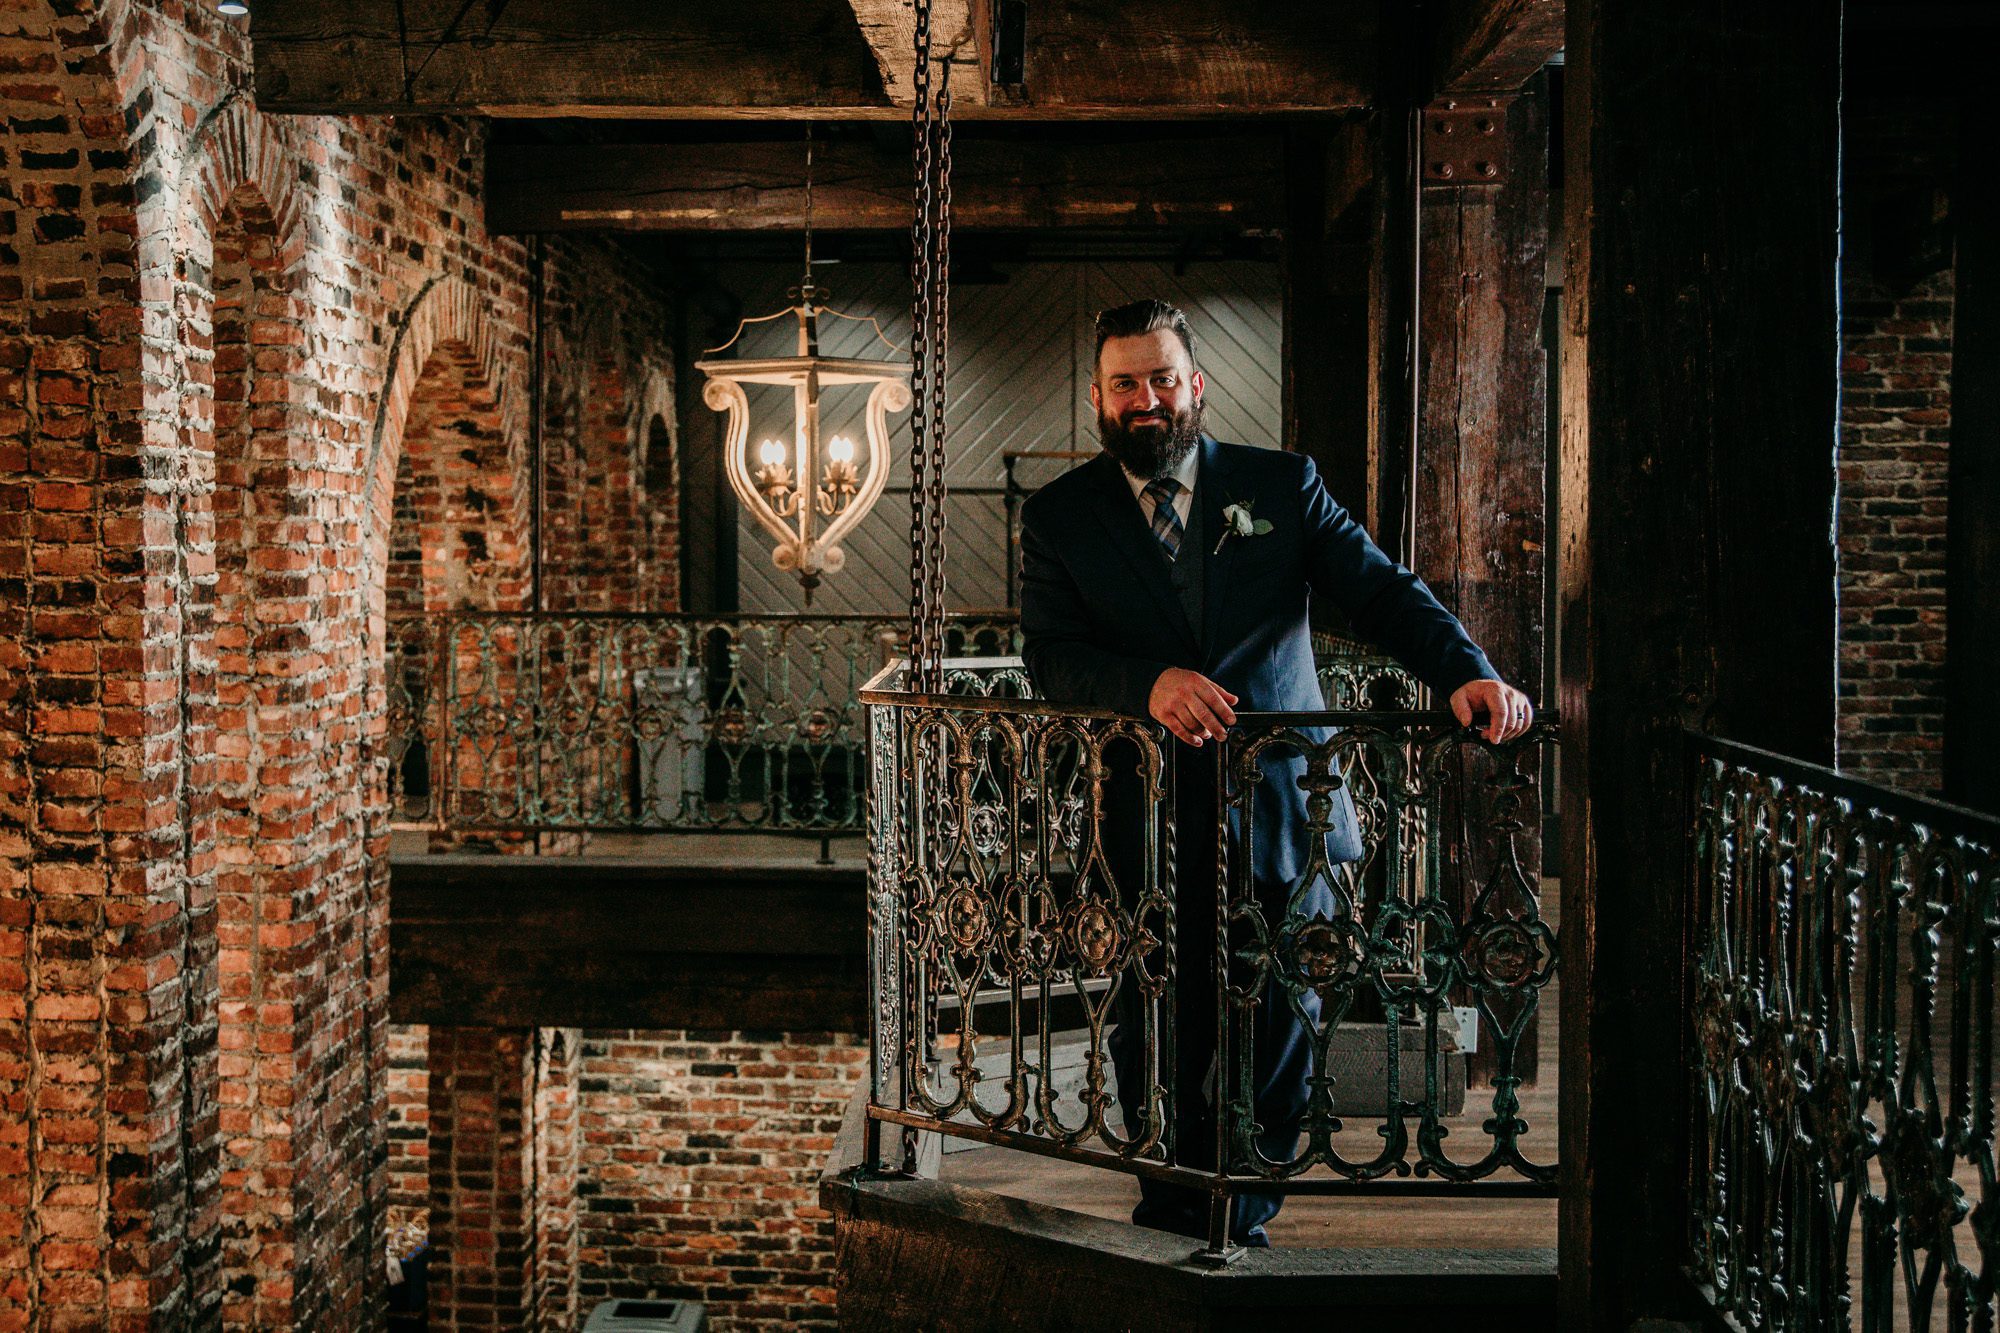 Groom inside a vintage brick building old world charm at the Bedford event and wedding venue in Nashville TN. Photo by Krista Lee Photography